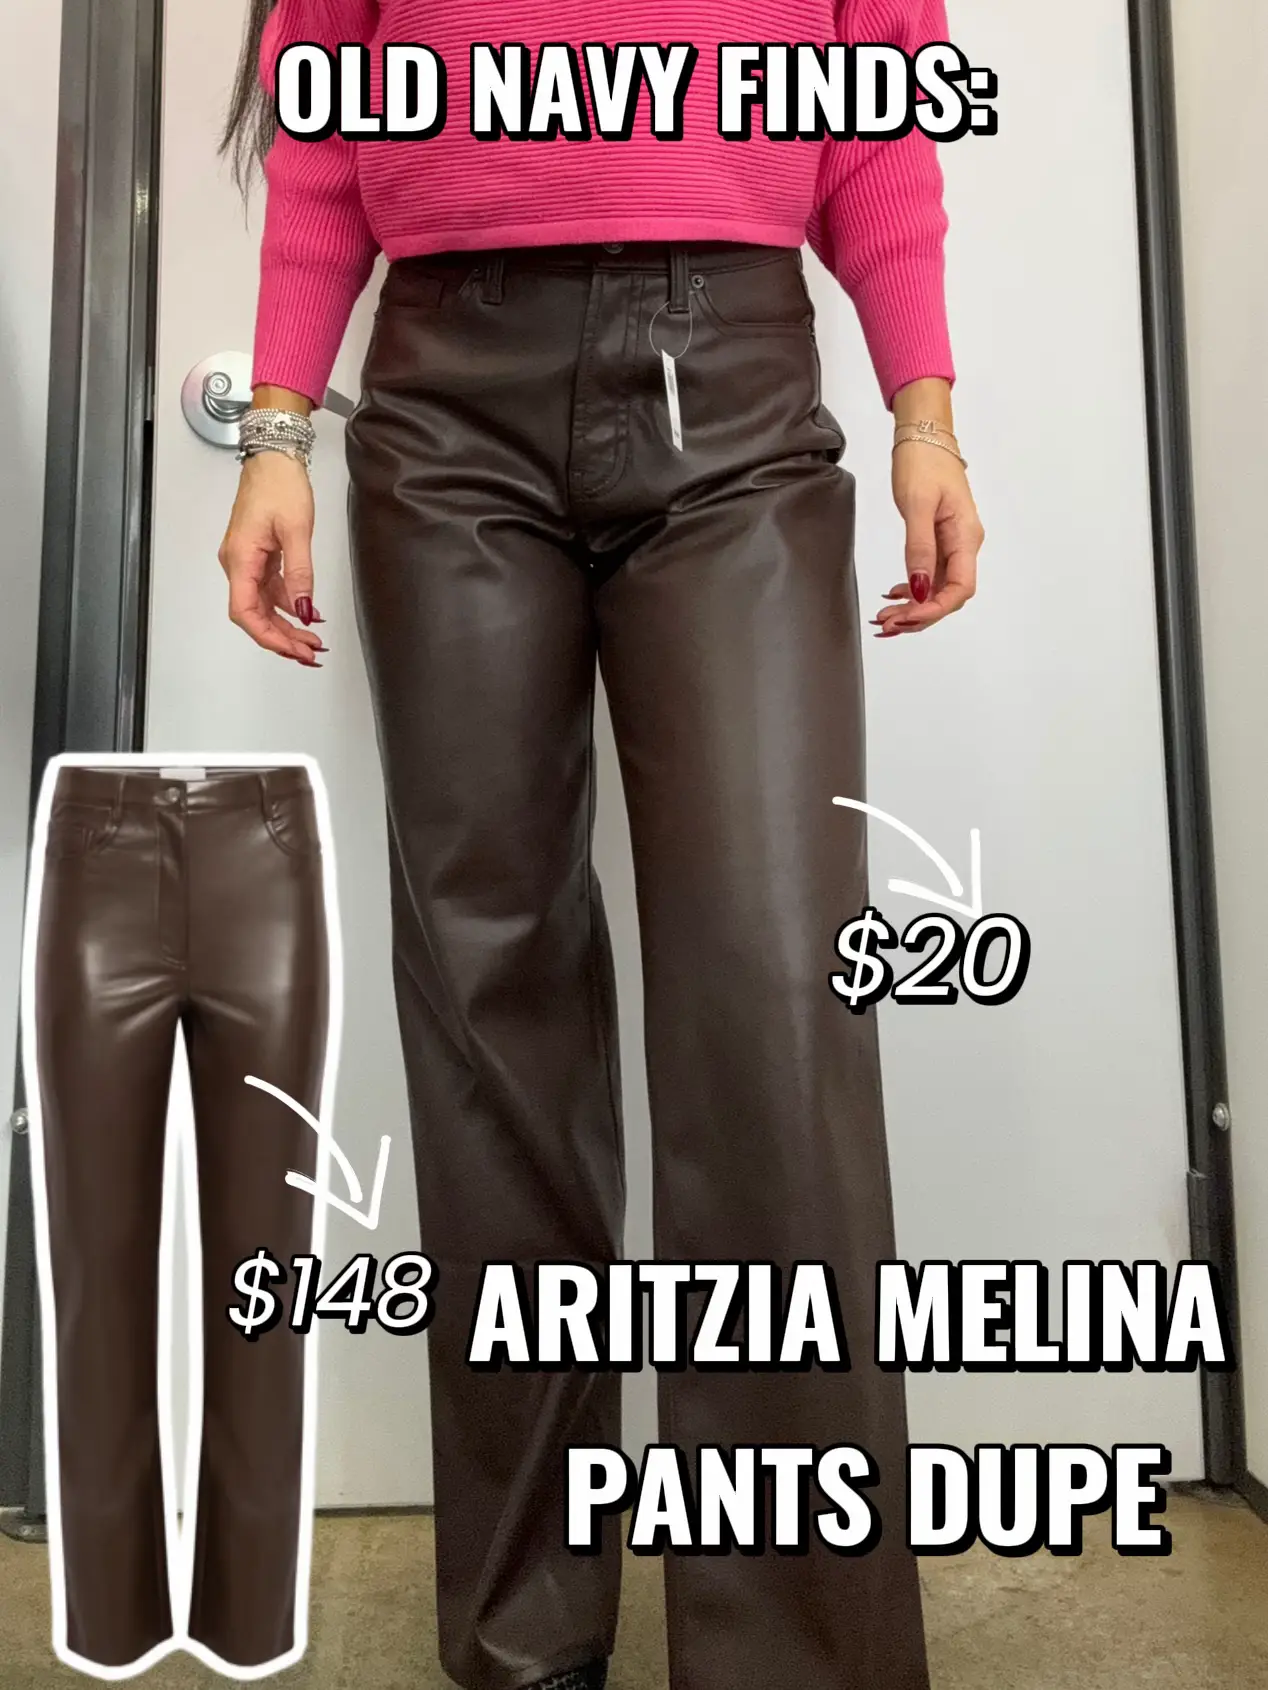 ARITZIA MELINA PANT REVIEW - Are they worth it? 